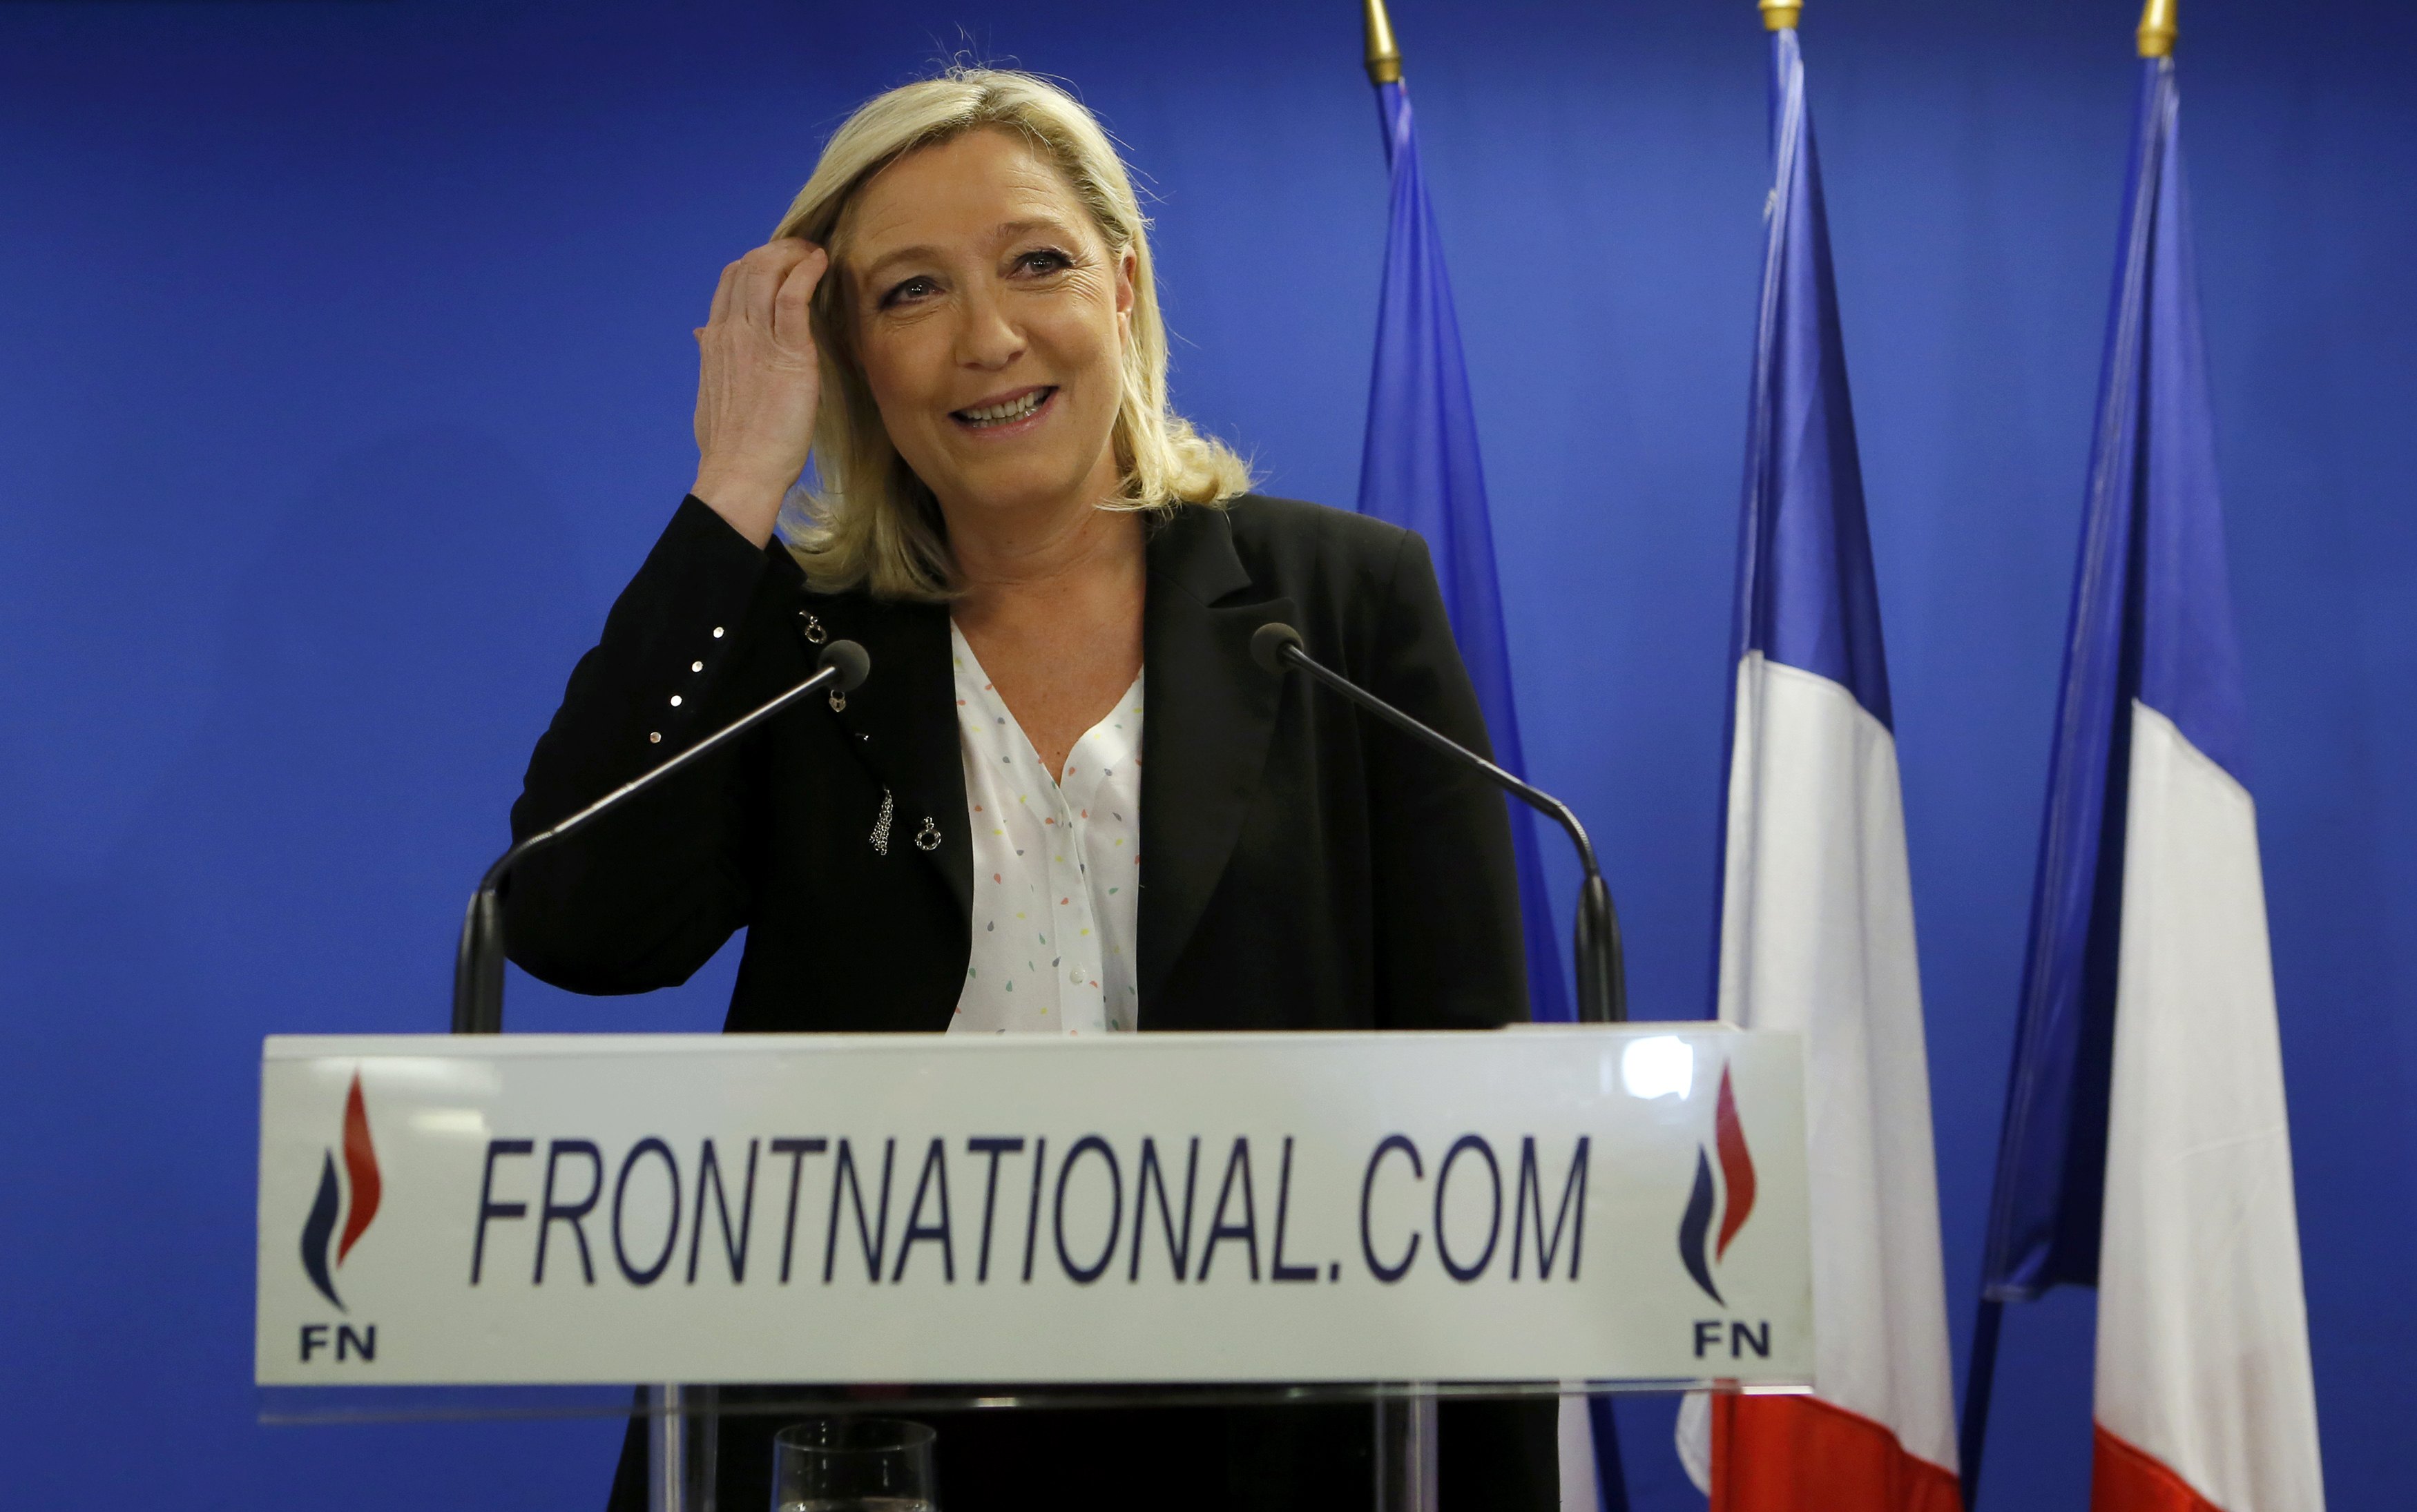 France's far-right National Front leader Marine Le Pen attends a news conference at their party's headquarters after the first round of French local elections in Nanterre, near Paris, March 22, 2015. REUTERS/Gonzalo Fuentes